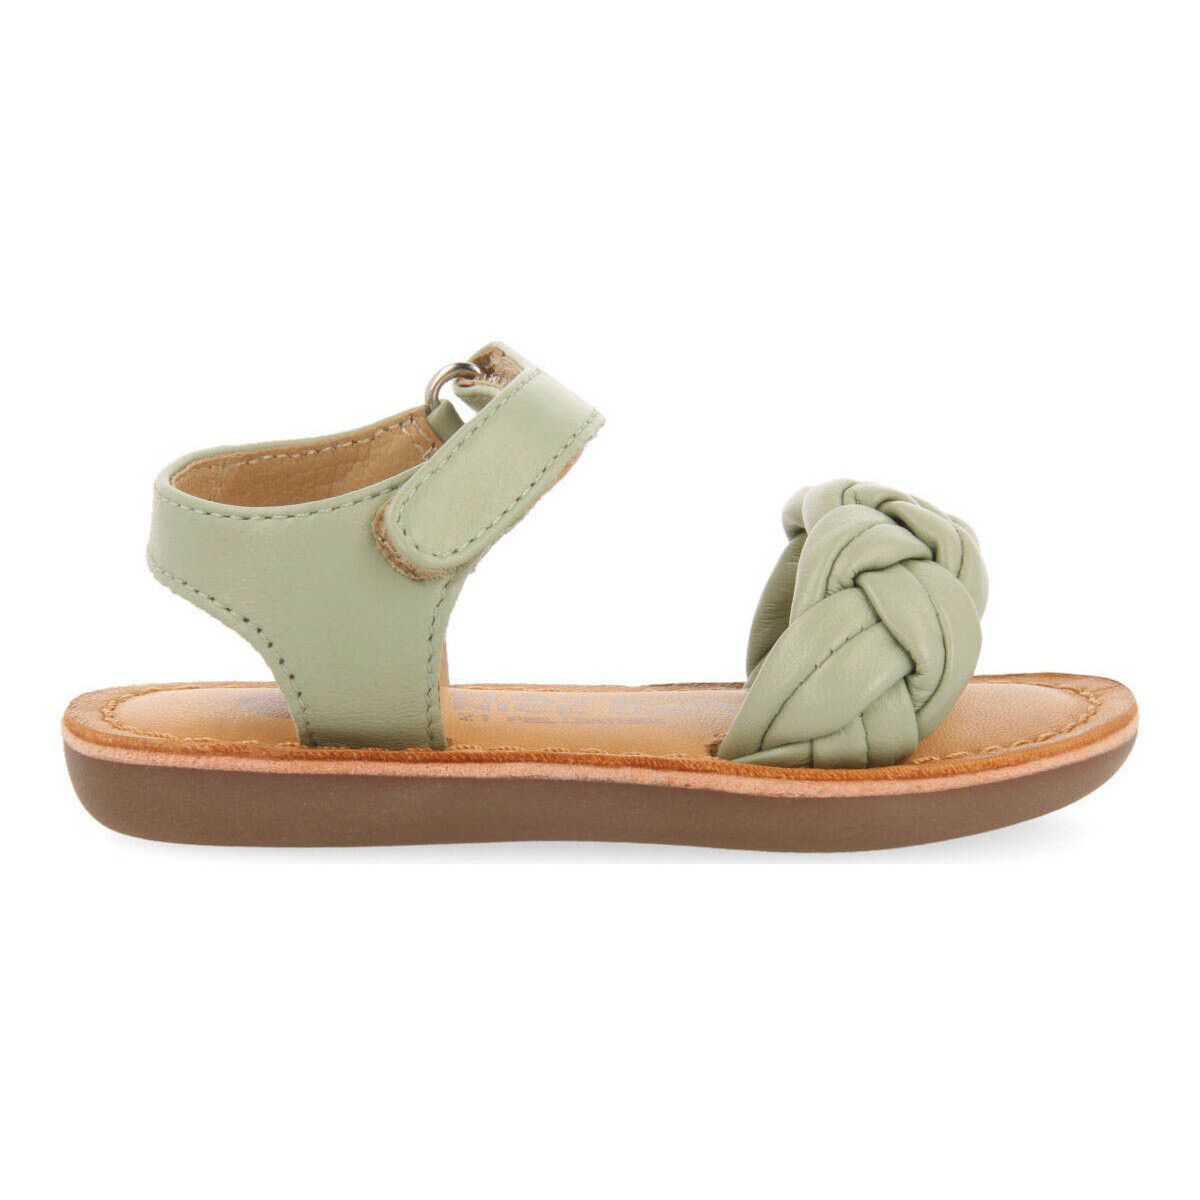 Chaussures Fille Sandales et Nu-pieds Gioseppo ennery Vert